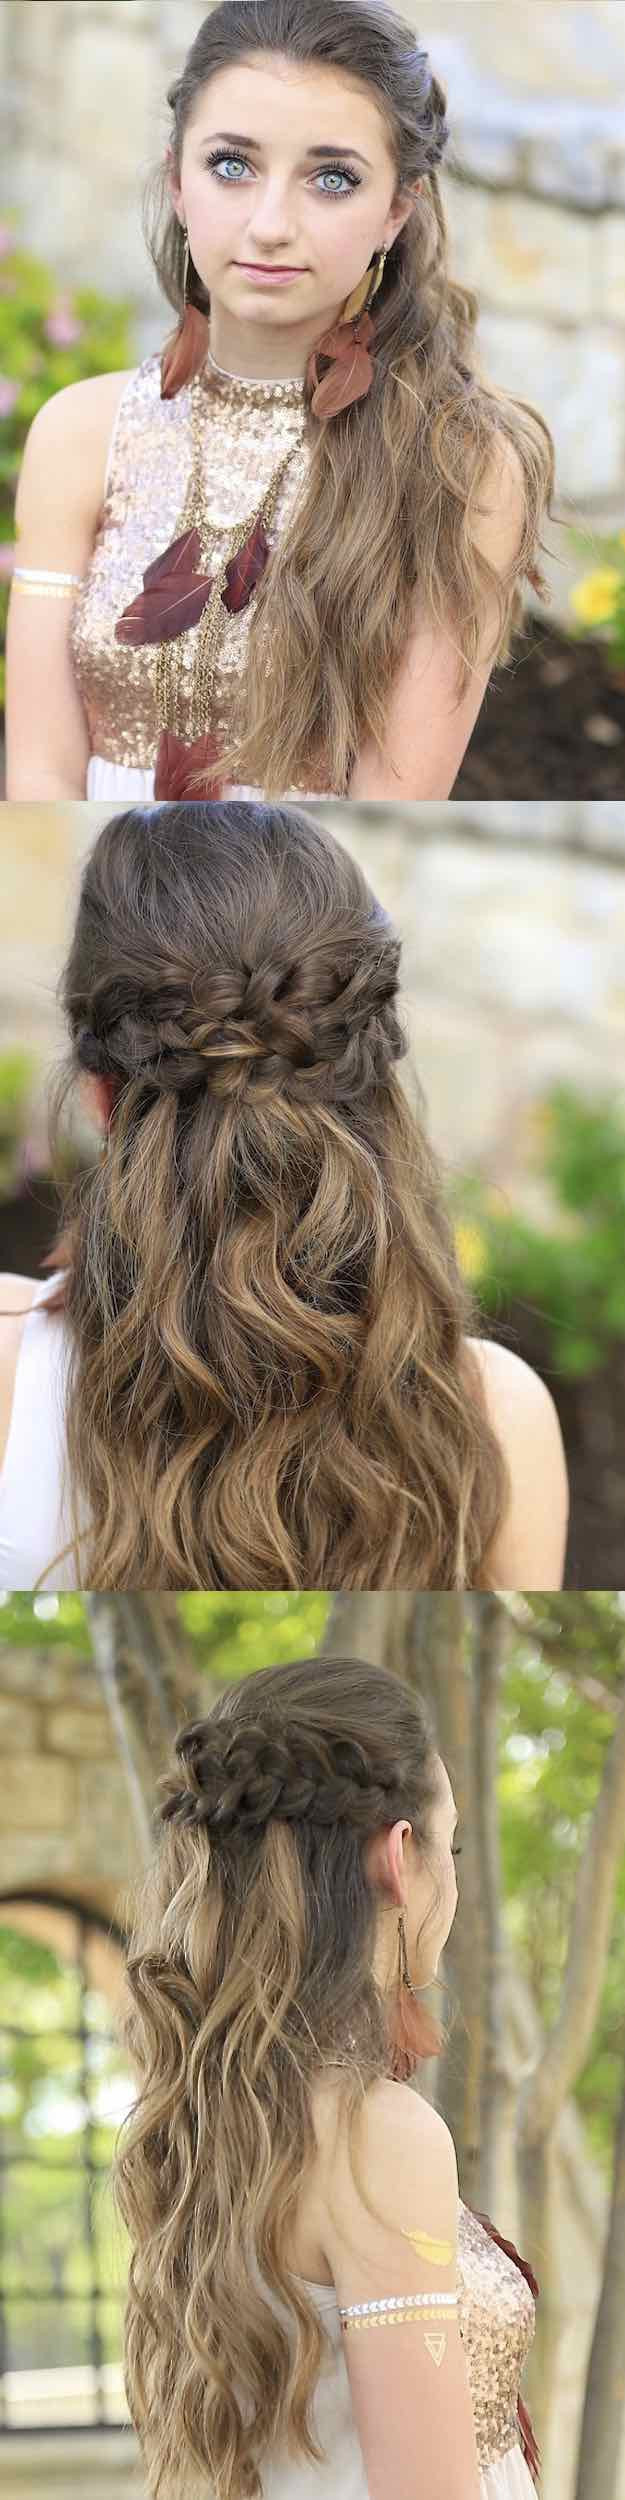 Prom Hairstyles Half Up Do
 25 Easy Half Up Half Down Hairstyle Tutorials For Prom